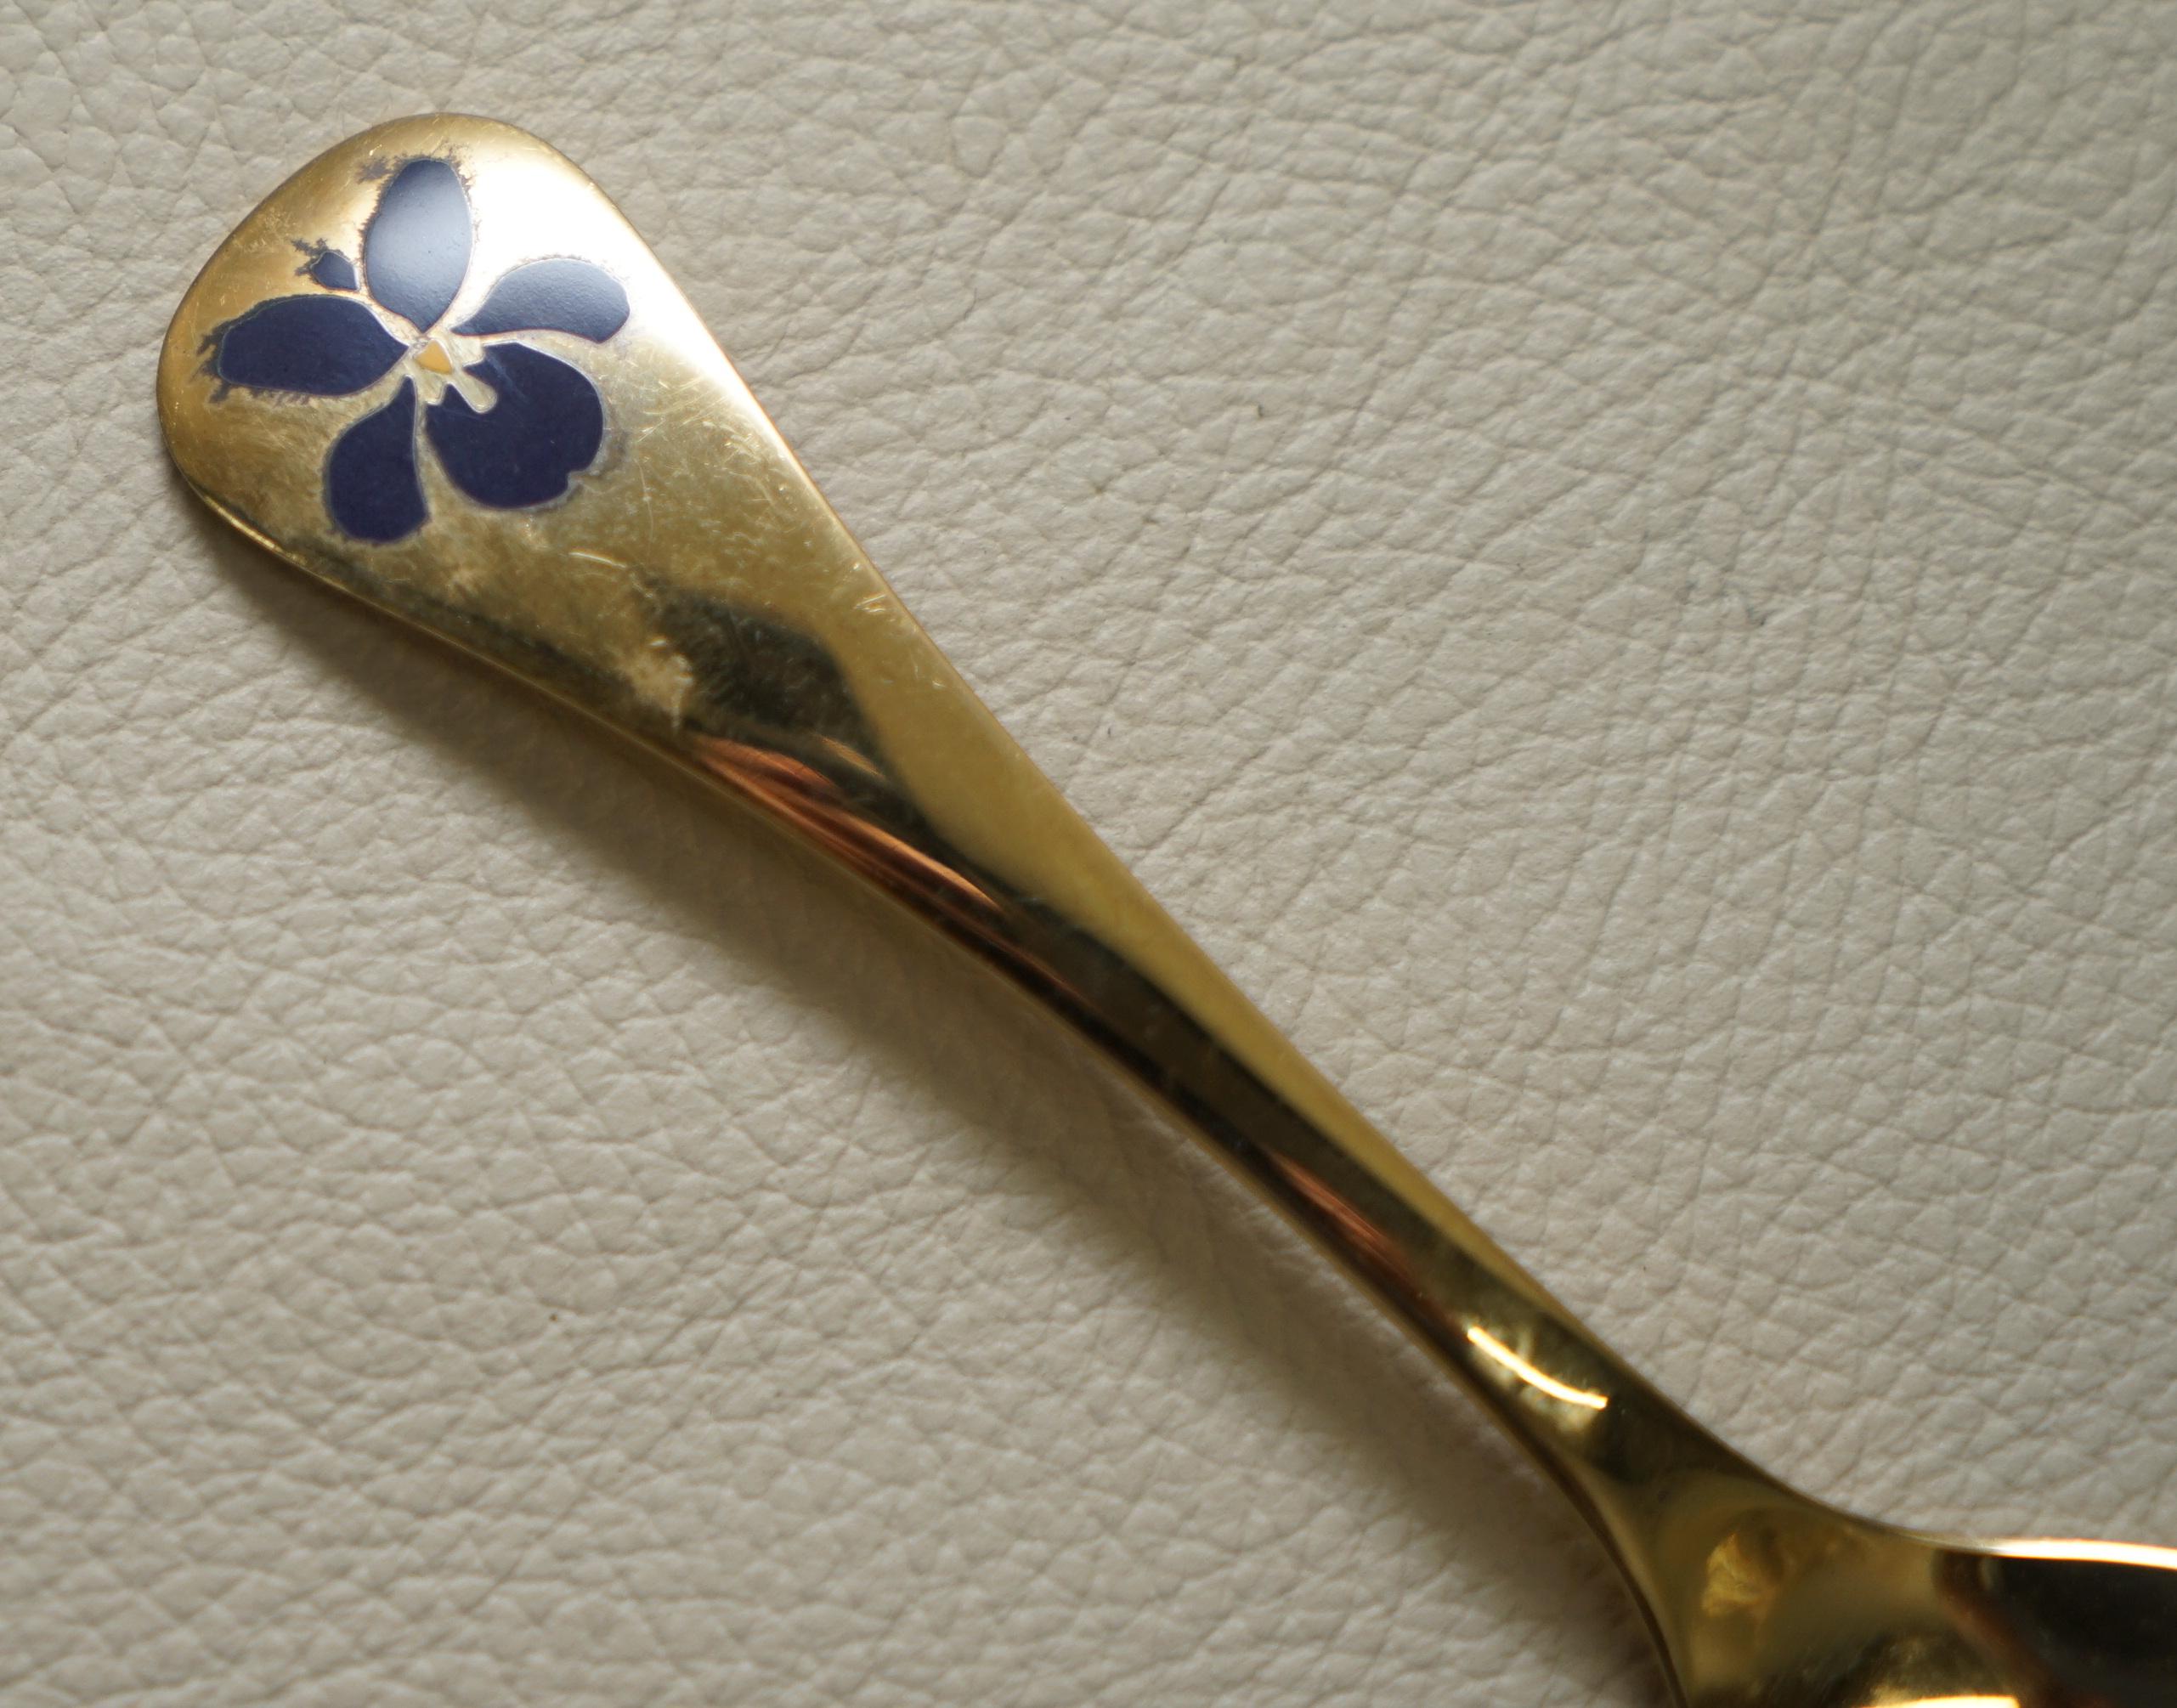 Wimbledon-Furniture

Wimbledon-Furniture is delighted to offer for sale this lovely original 1977 solid sterling silver Georg Jensen annual spoon

A good looking and decorative piece, fully gold gilt and decorated with an Irish